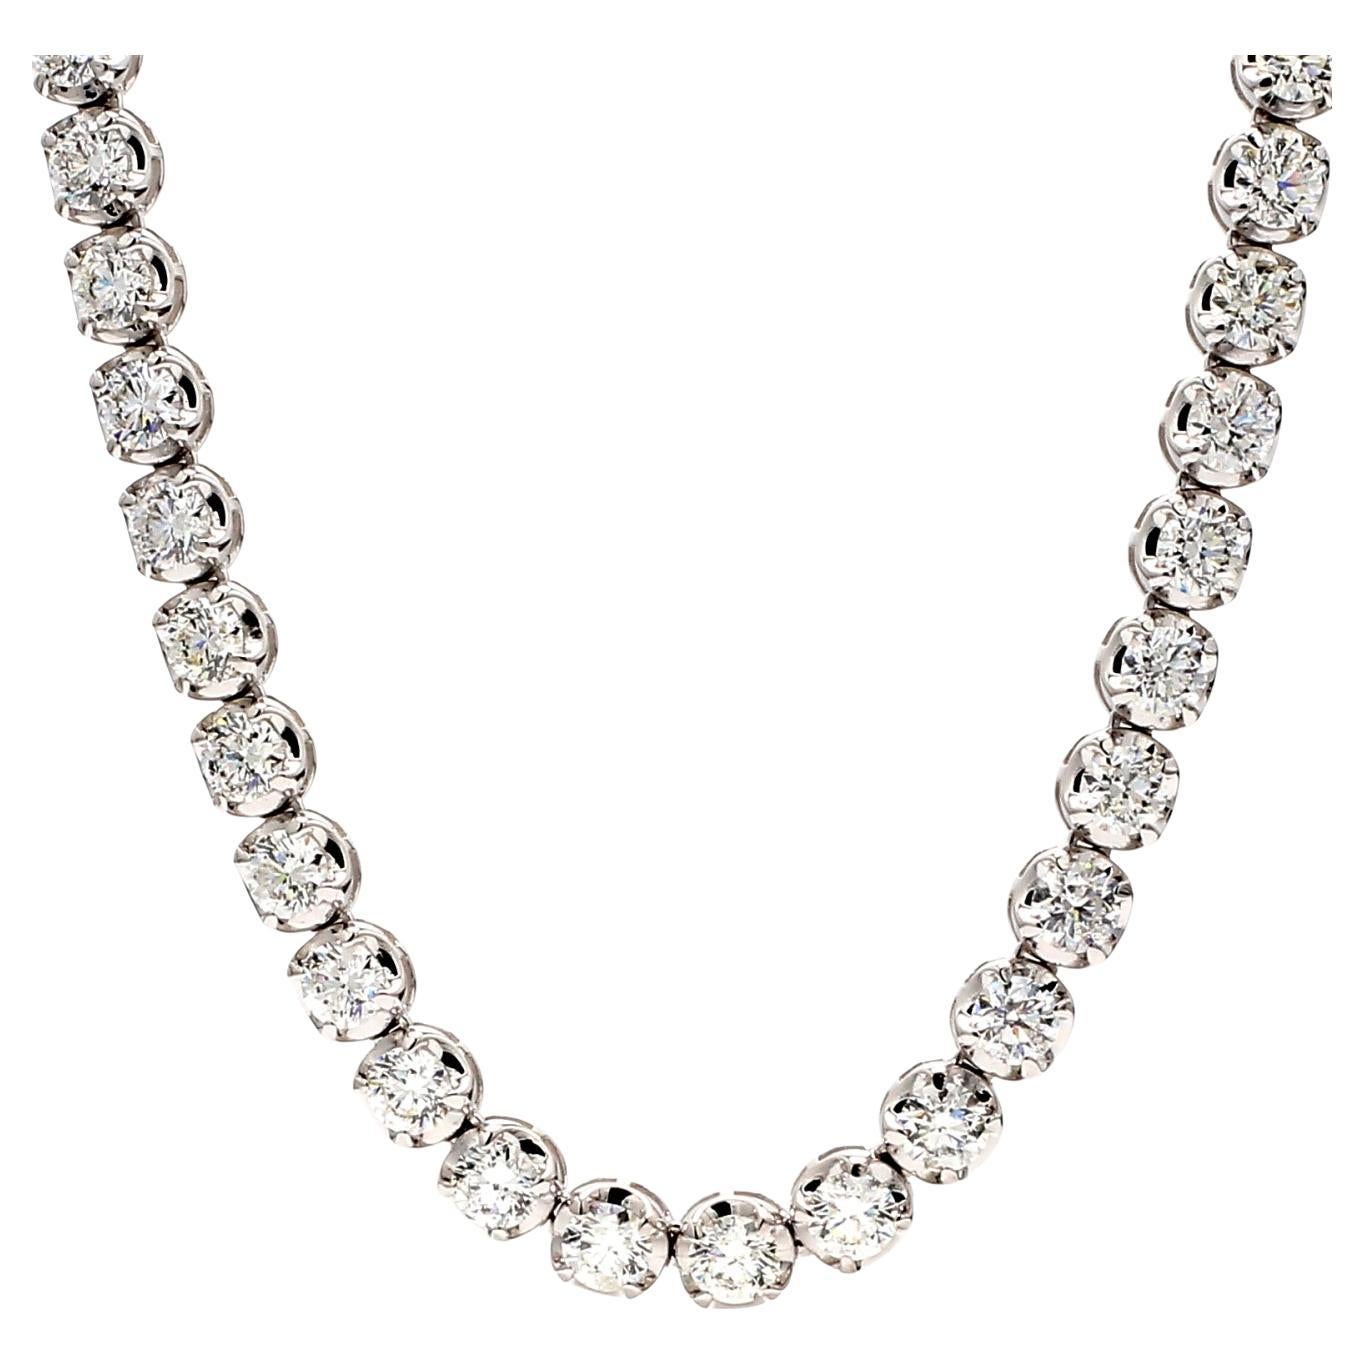 Tennis Necklace in 14K White Gold with Round Diamonds. D10.70ct.t.w. For Sale